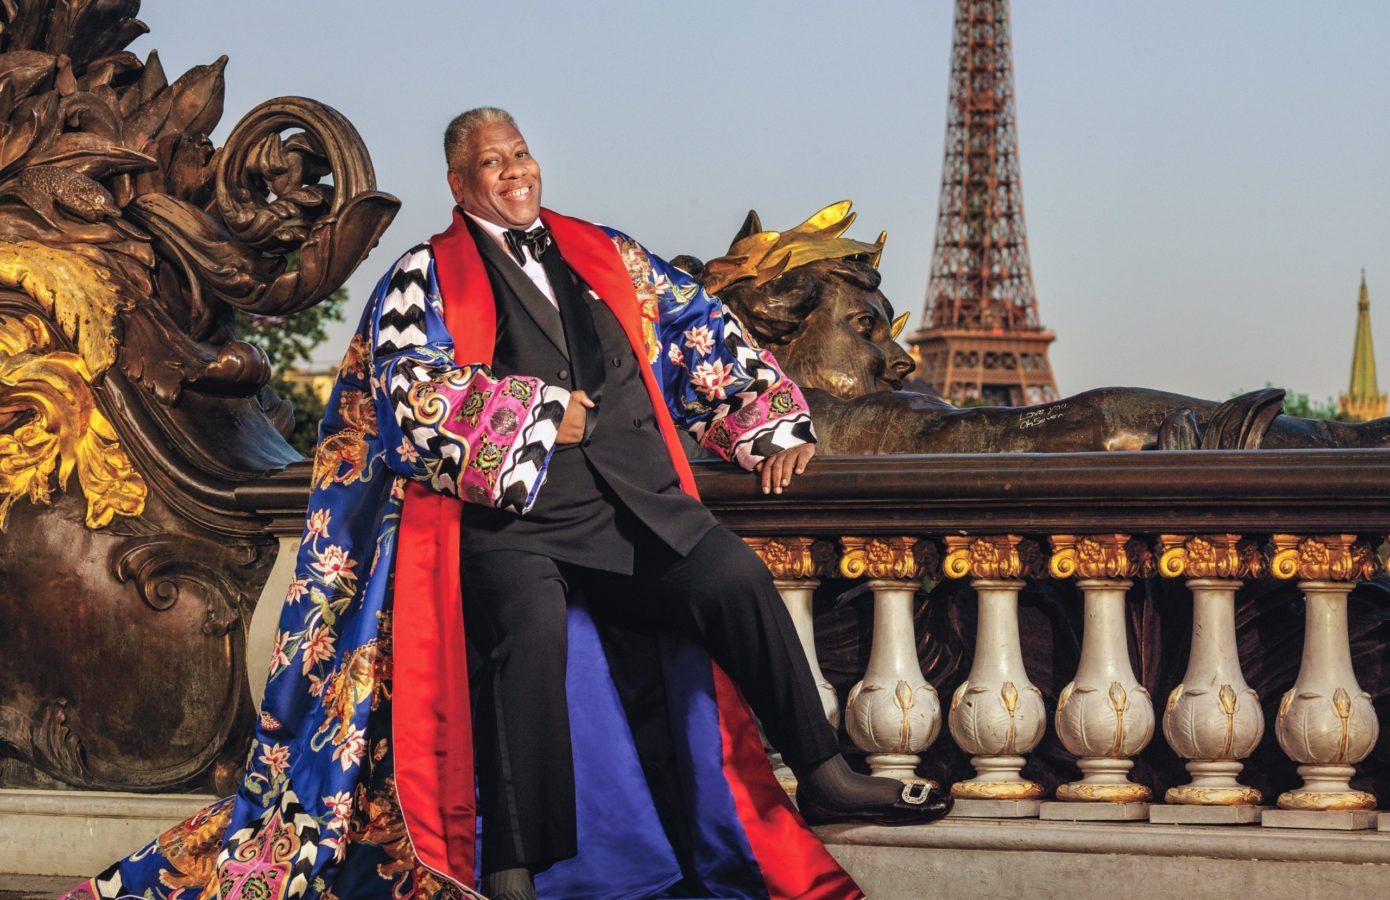 André Leon Talley, legendary fashion visionary, passes away at 73